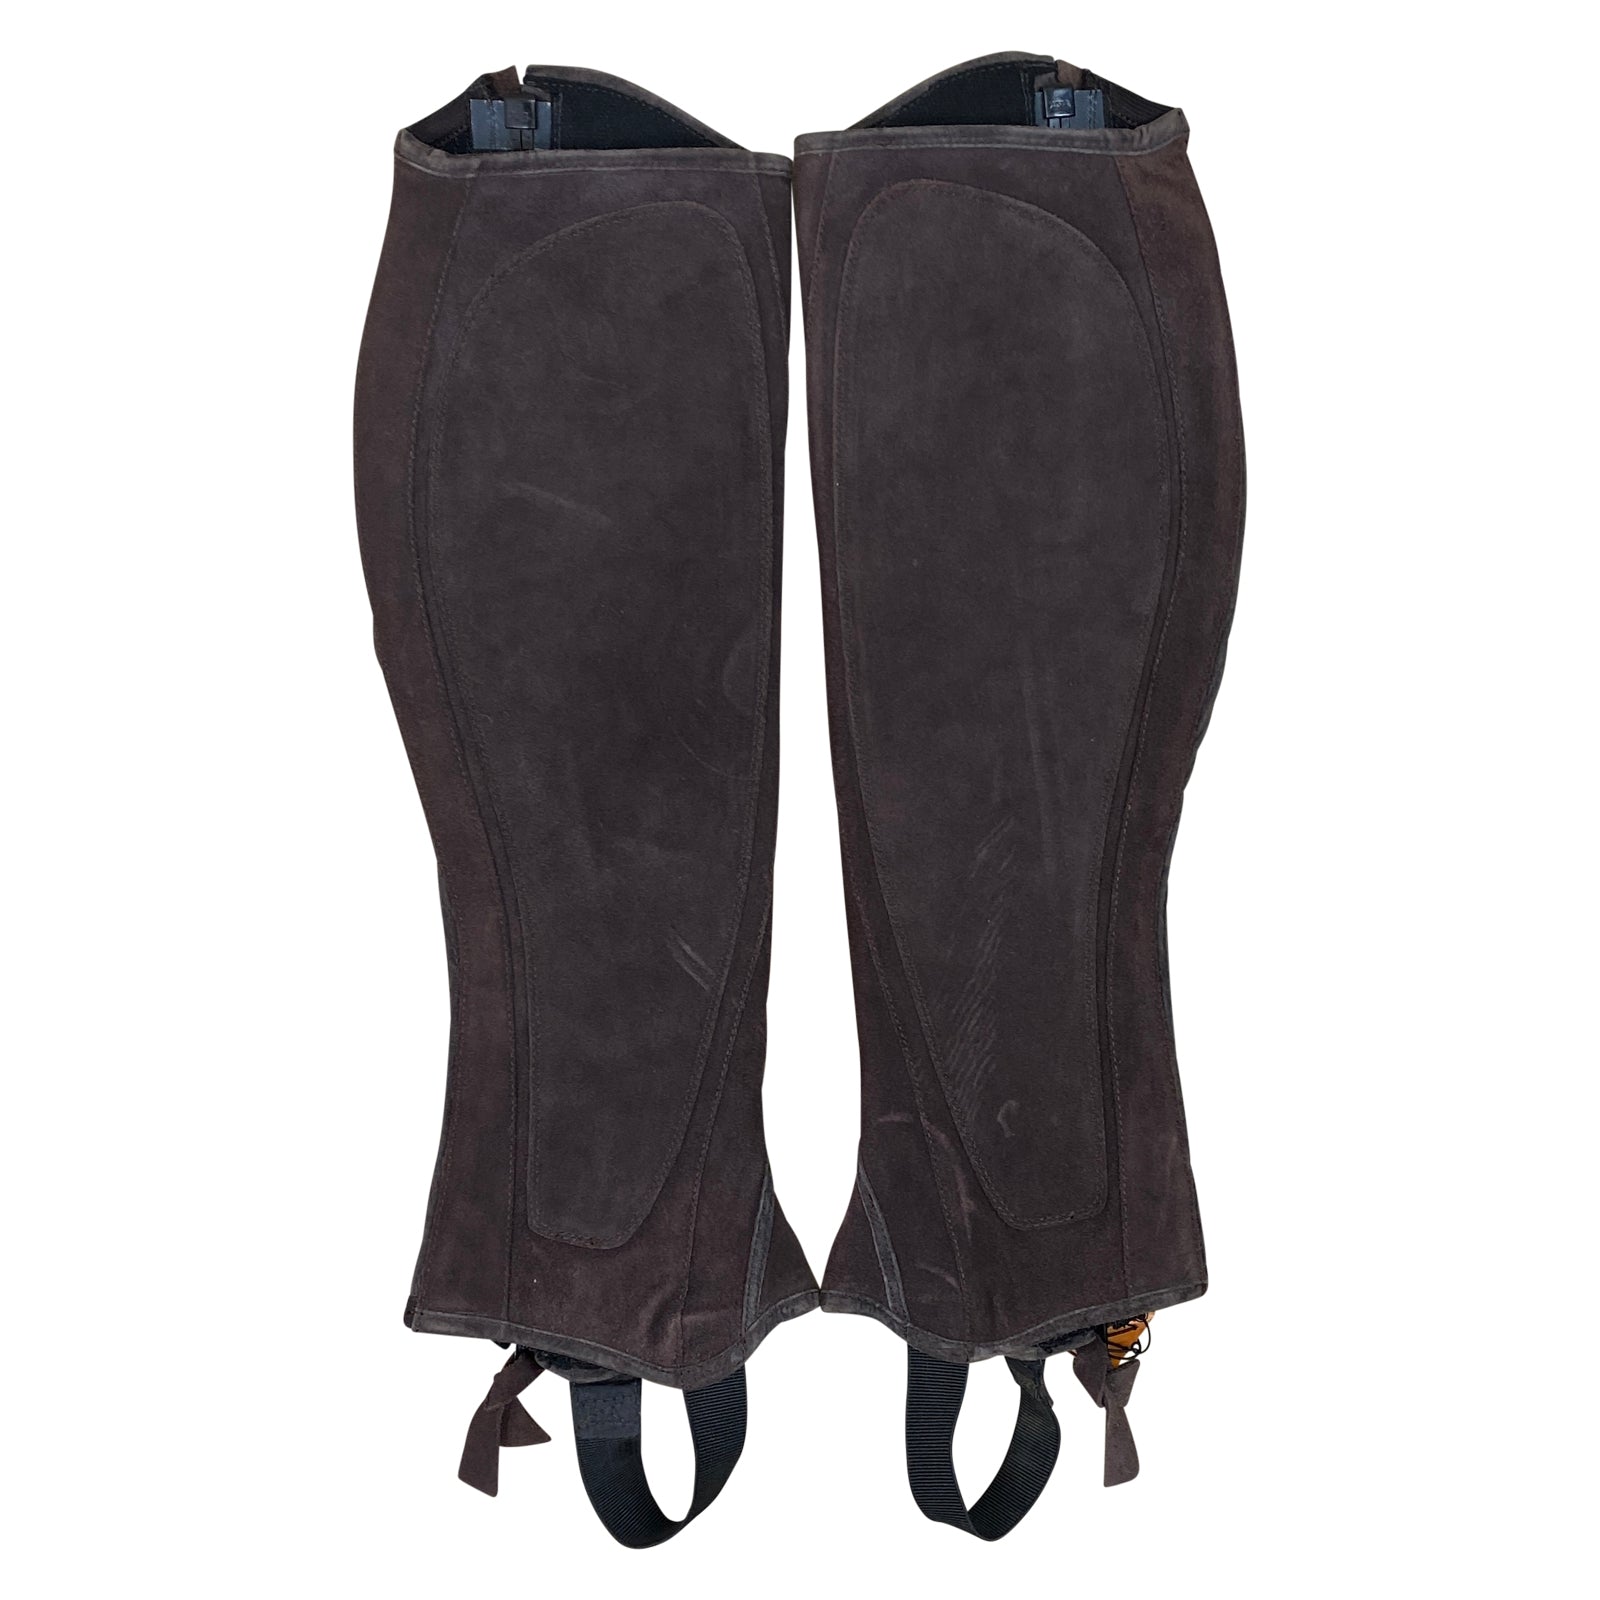 Ariat All Around Half Chaps II in Brown 